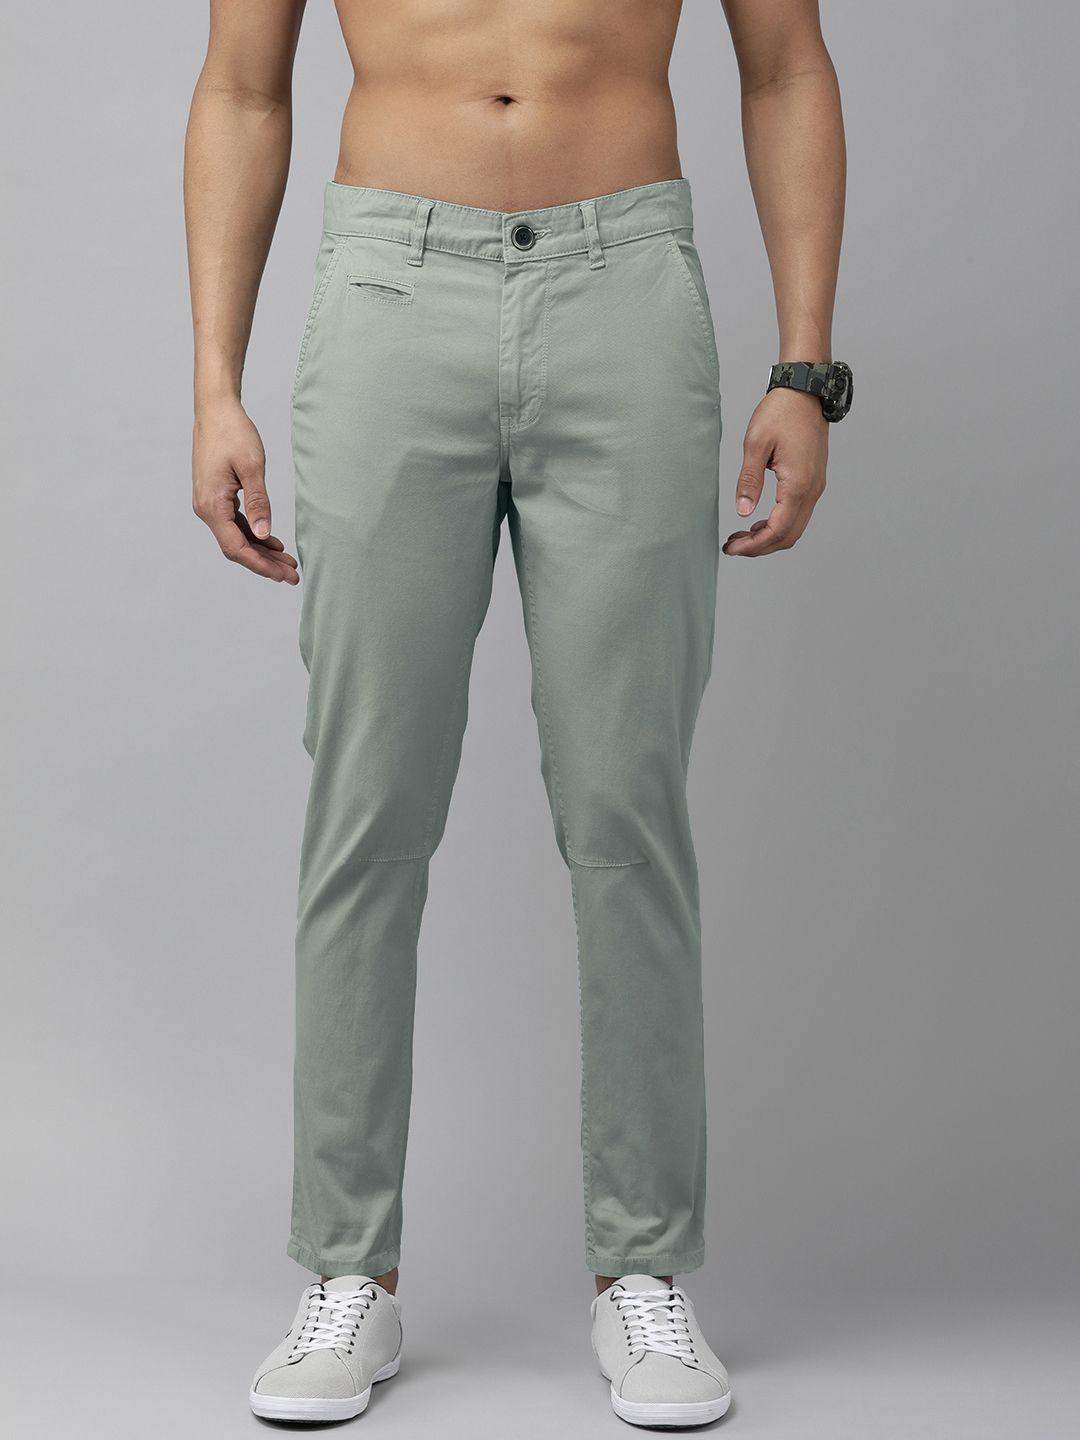 the roadster life co. men slim fit trousers